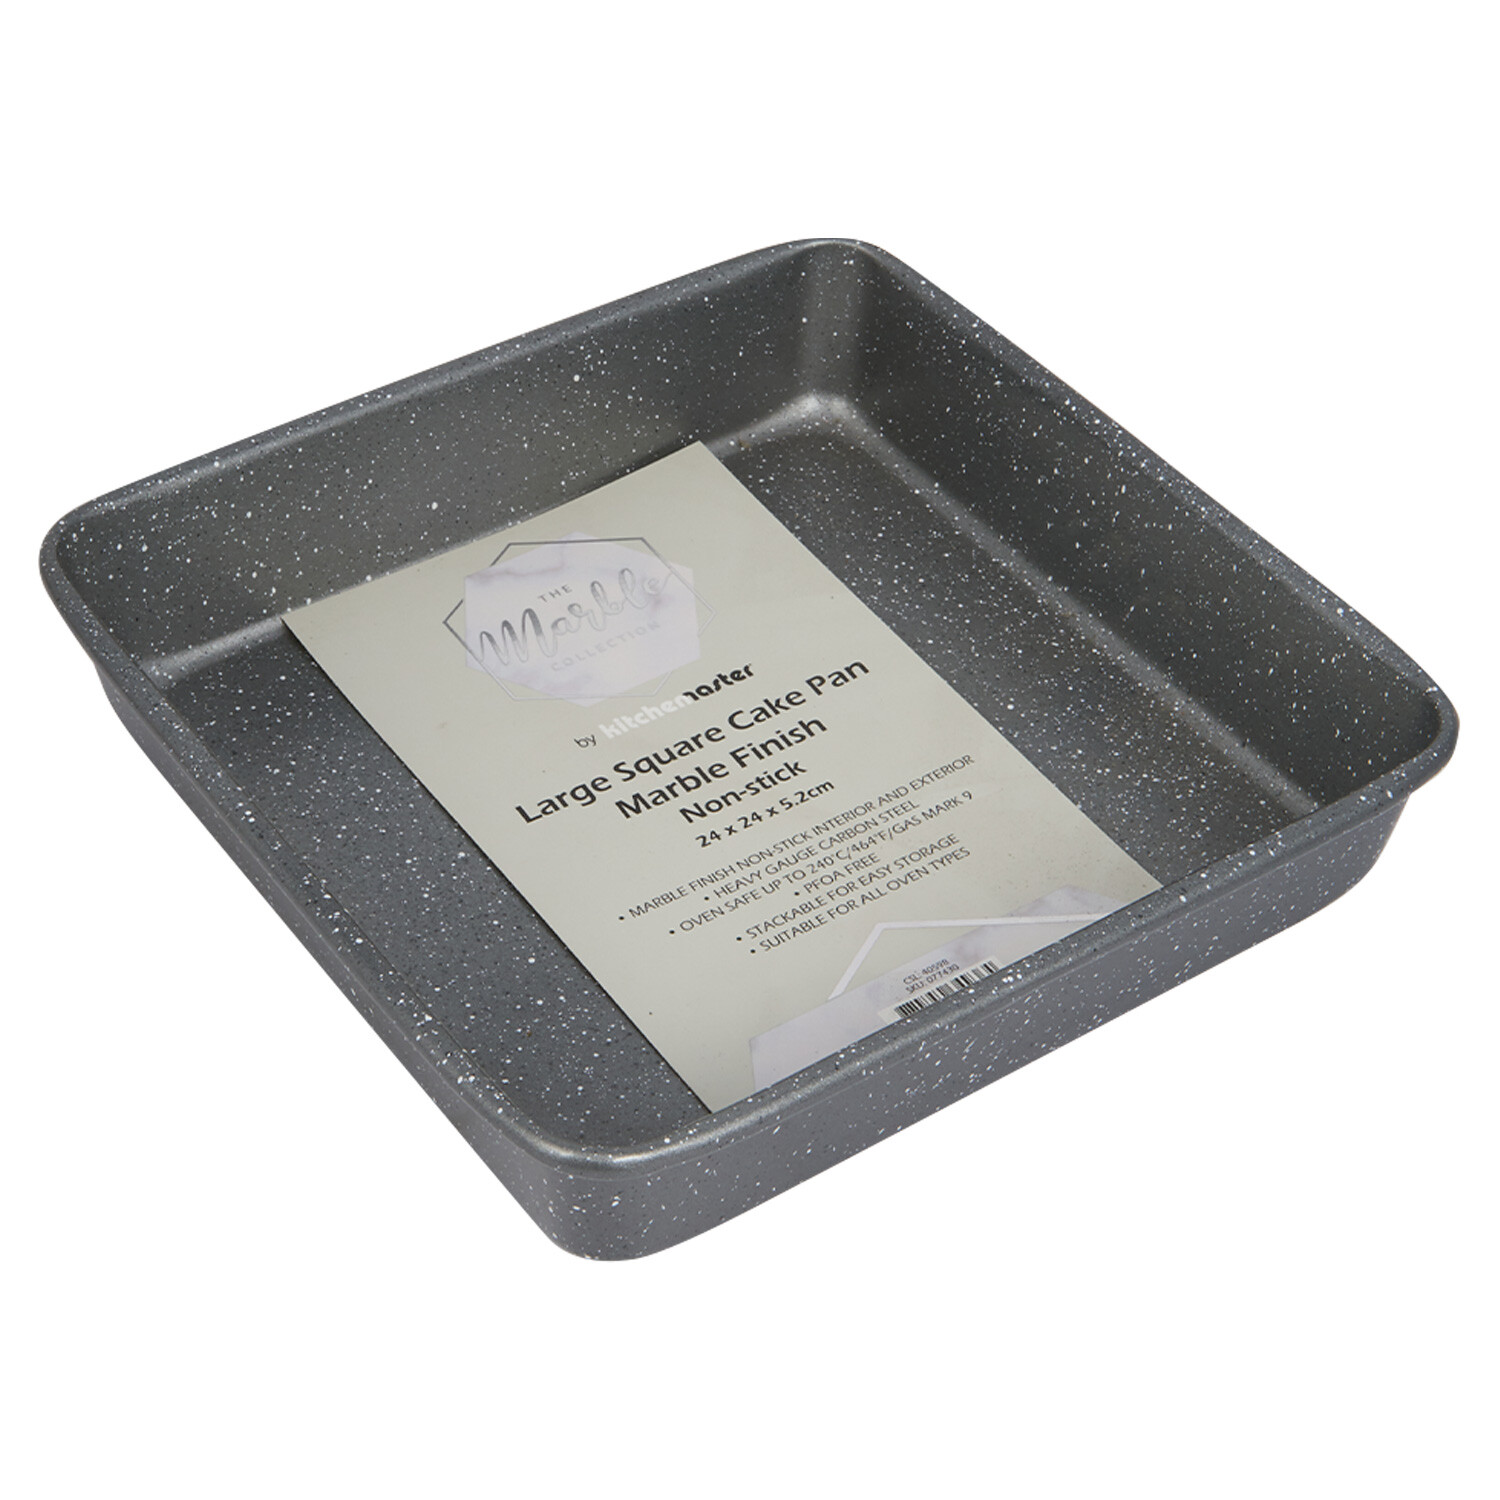 Marble Collection Large Square Cake Pan - Grey Image 1